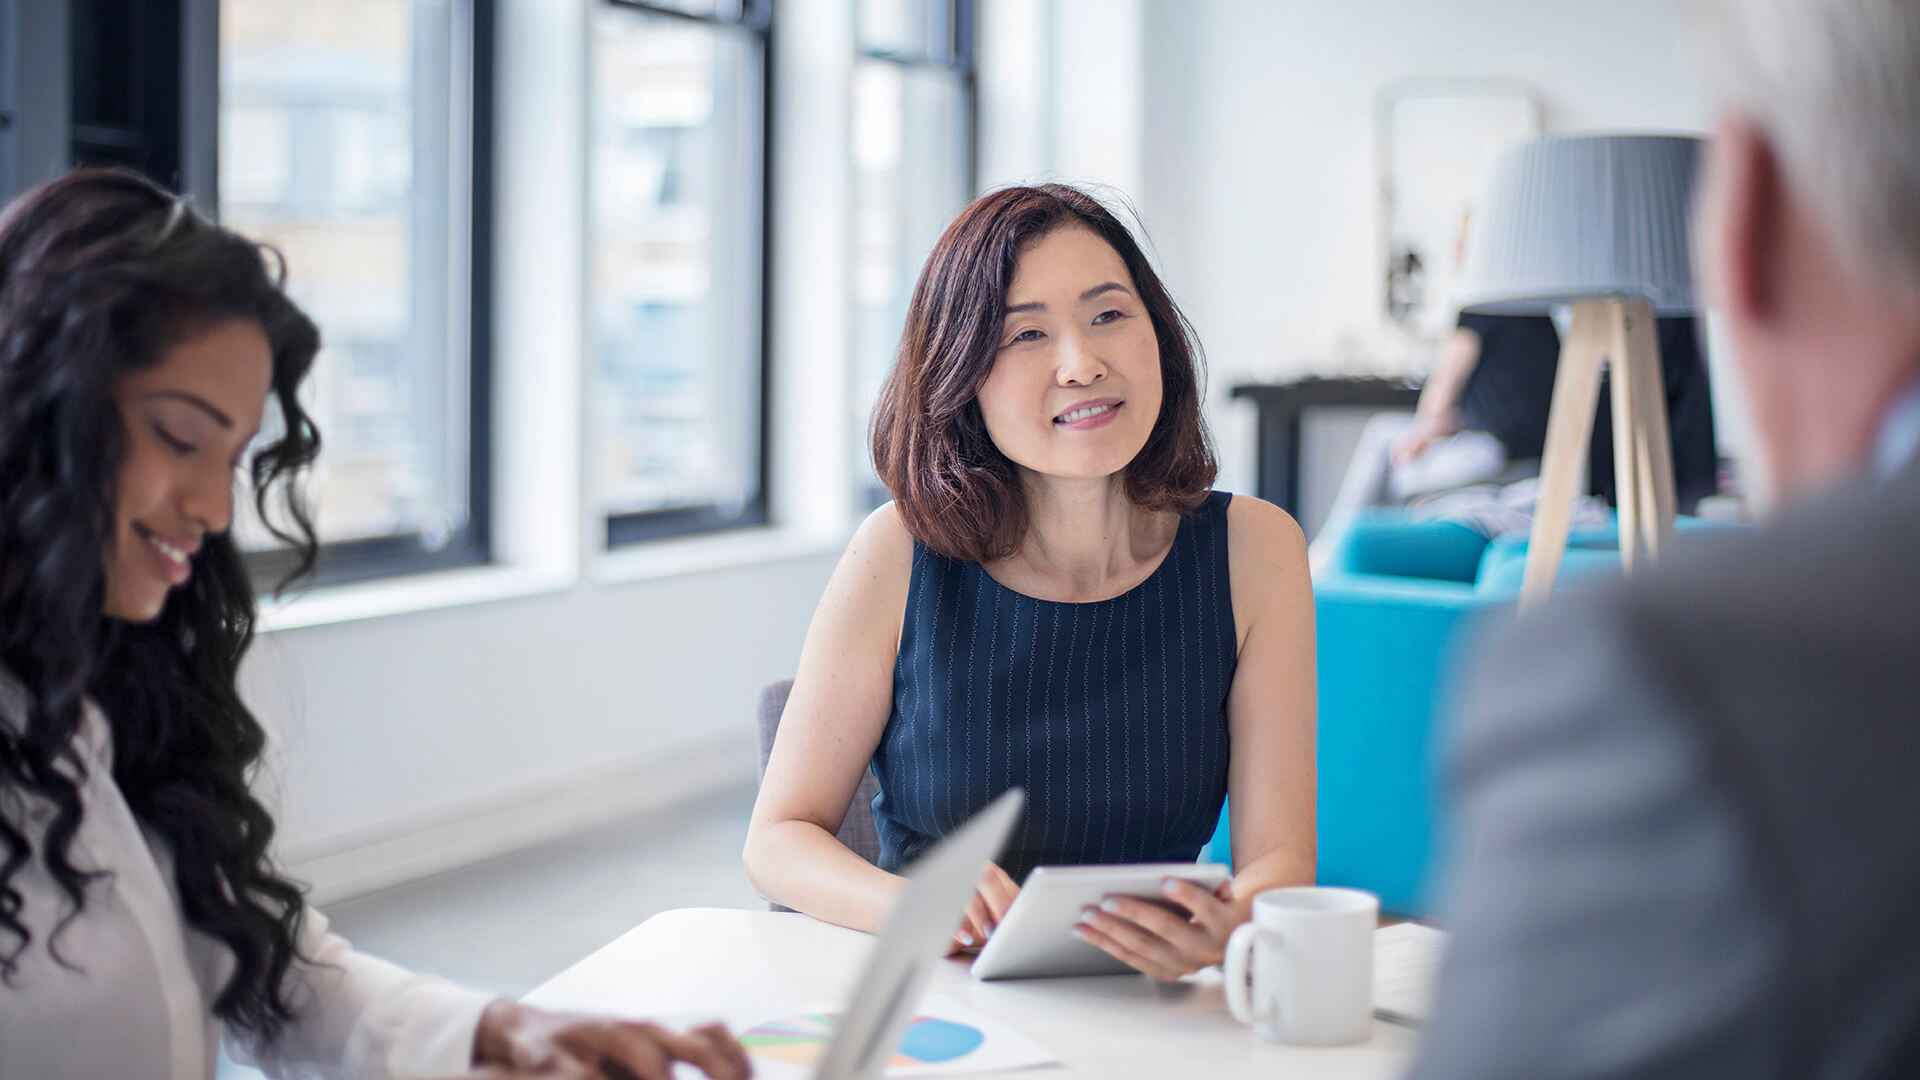 Businesswoman Looking At Male Colleague In Meeting